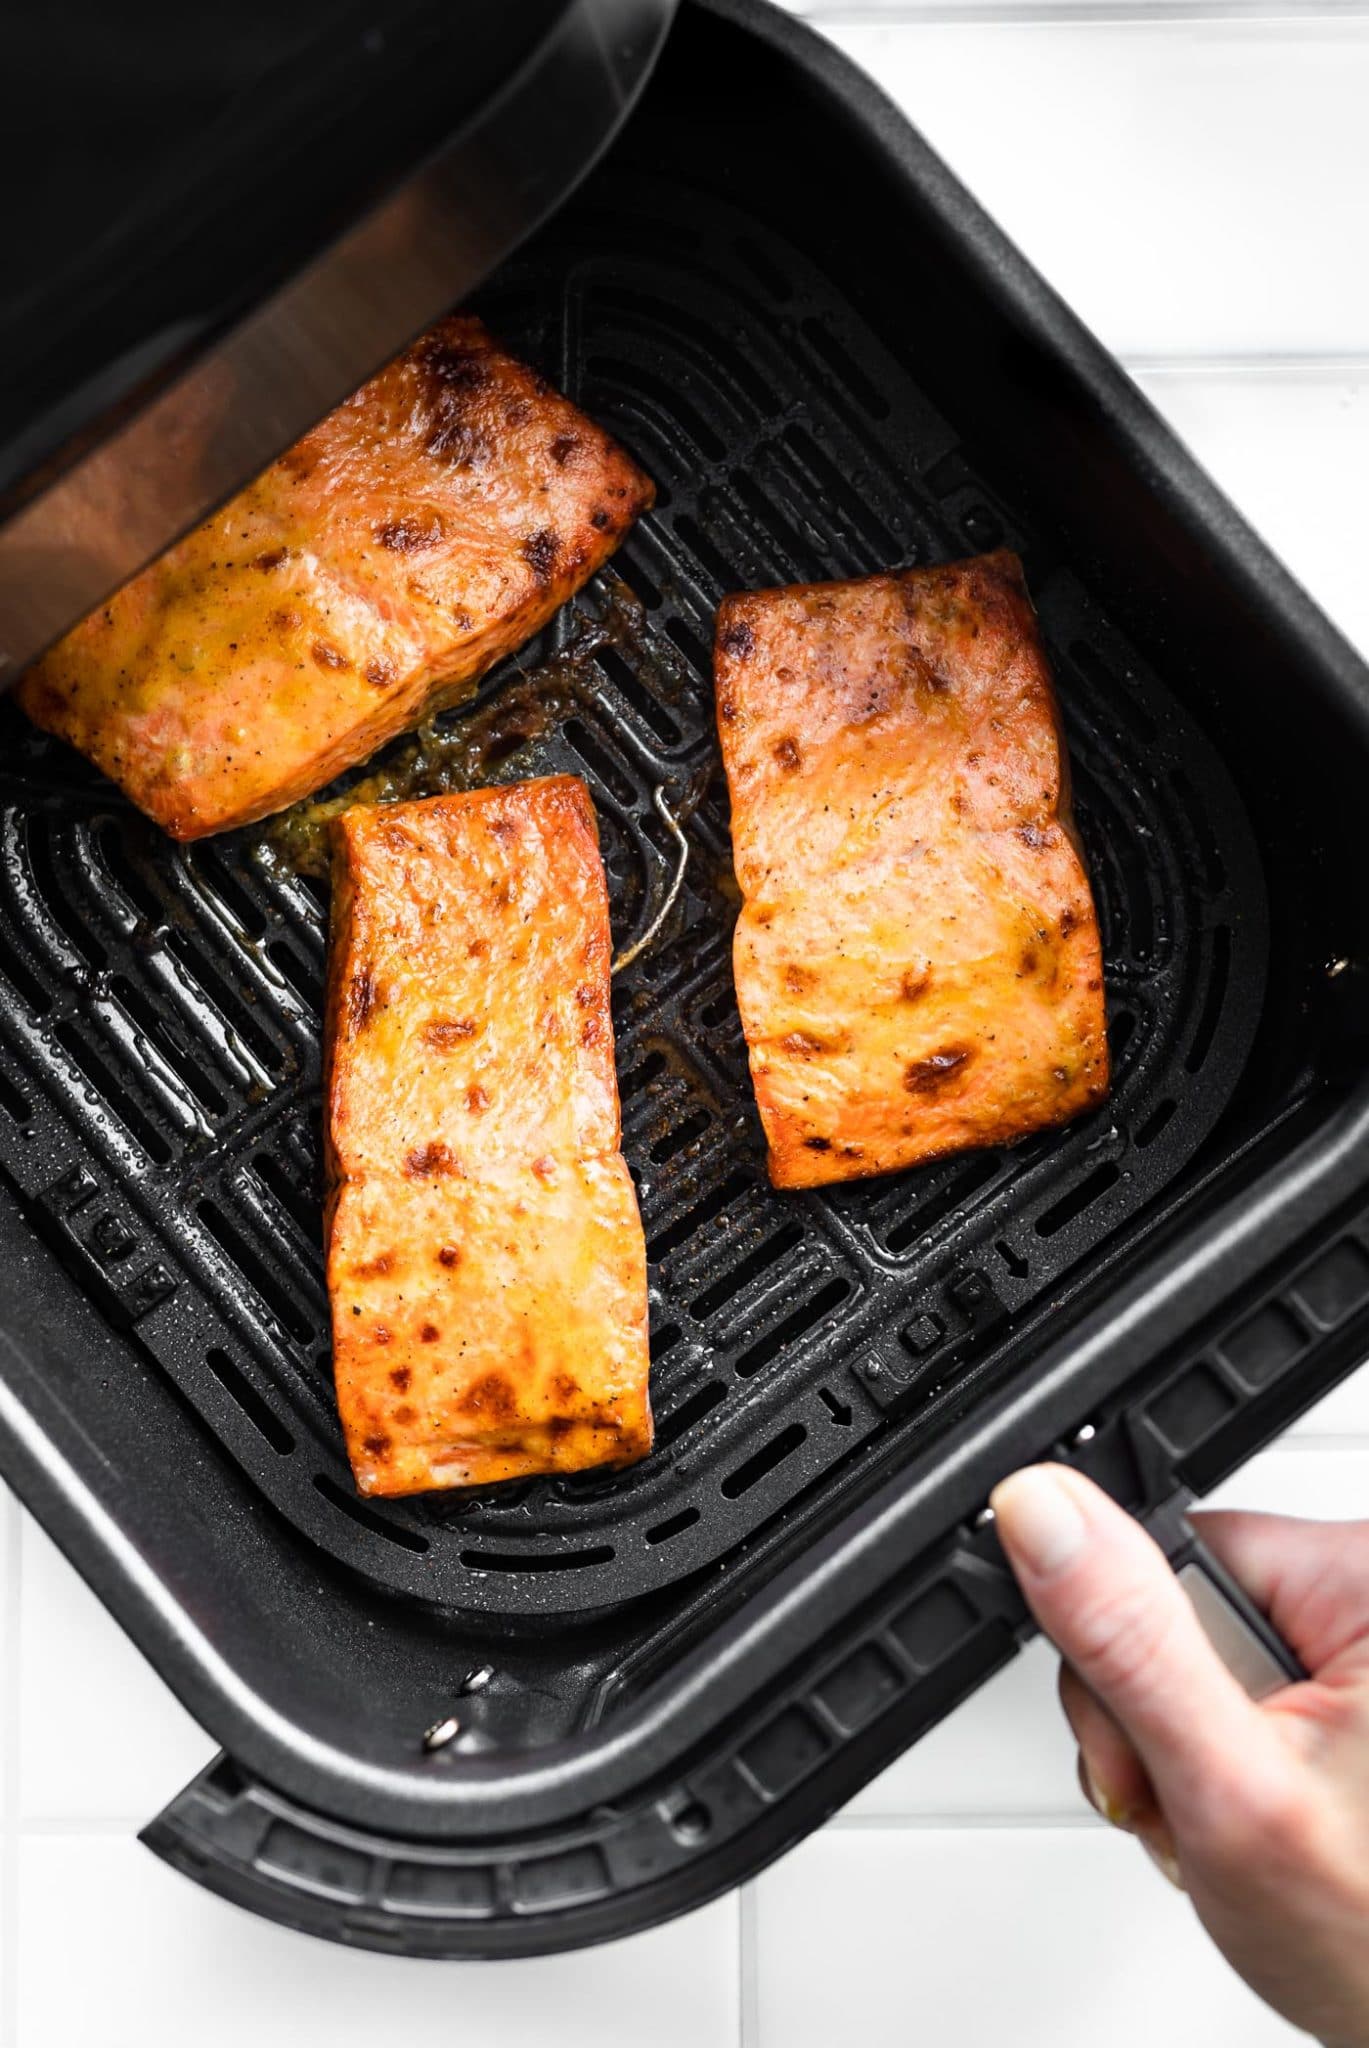 How To Cook Frozen Salmon In Air Fryer